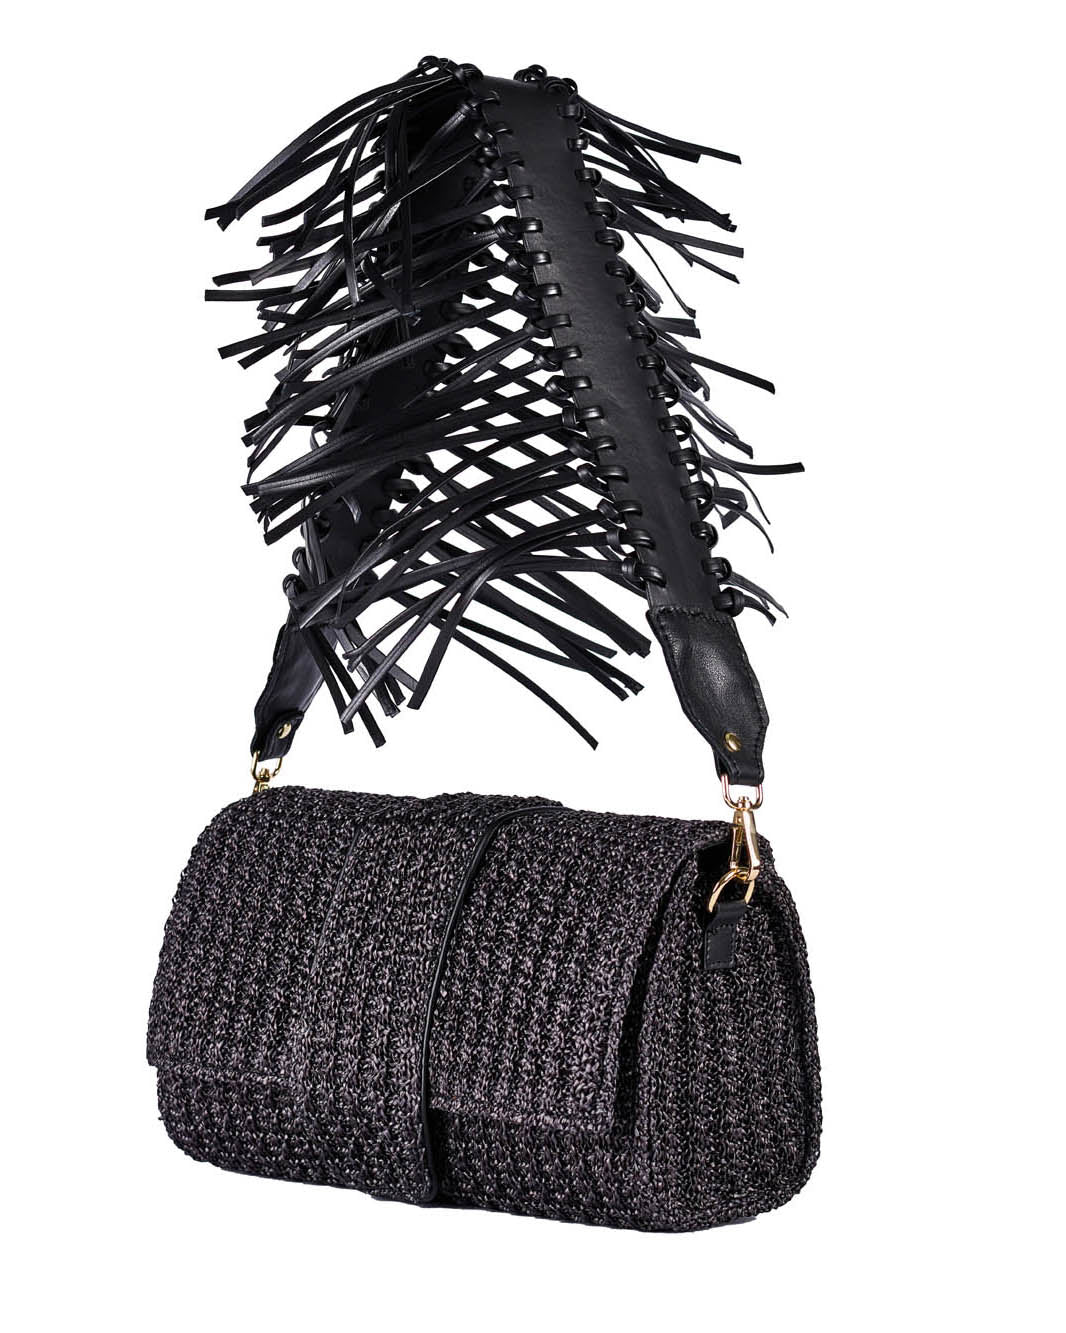 Black woven handbag with leather strap and decorative fringe